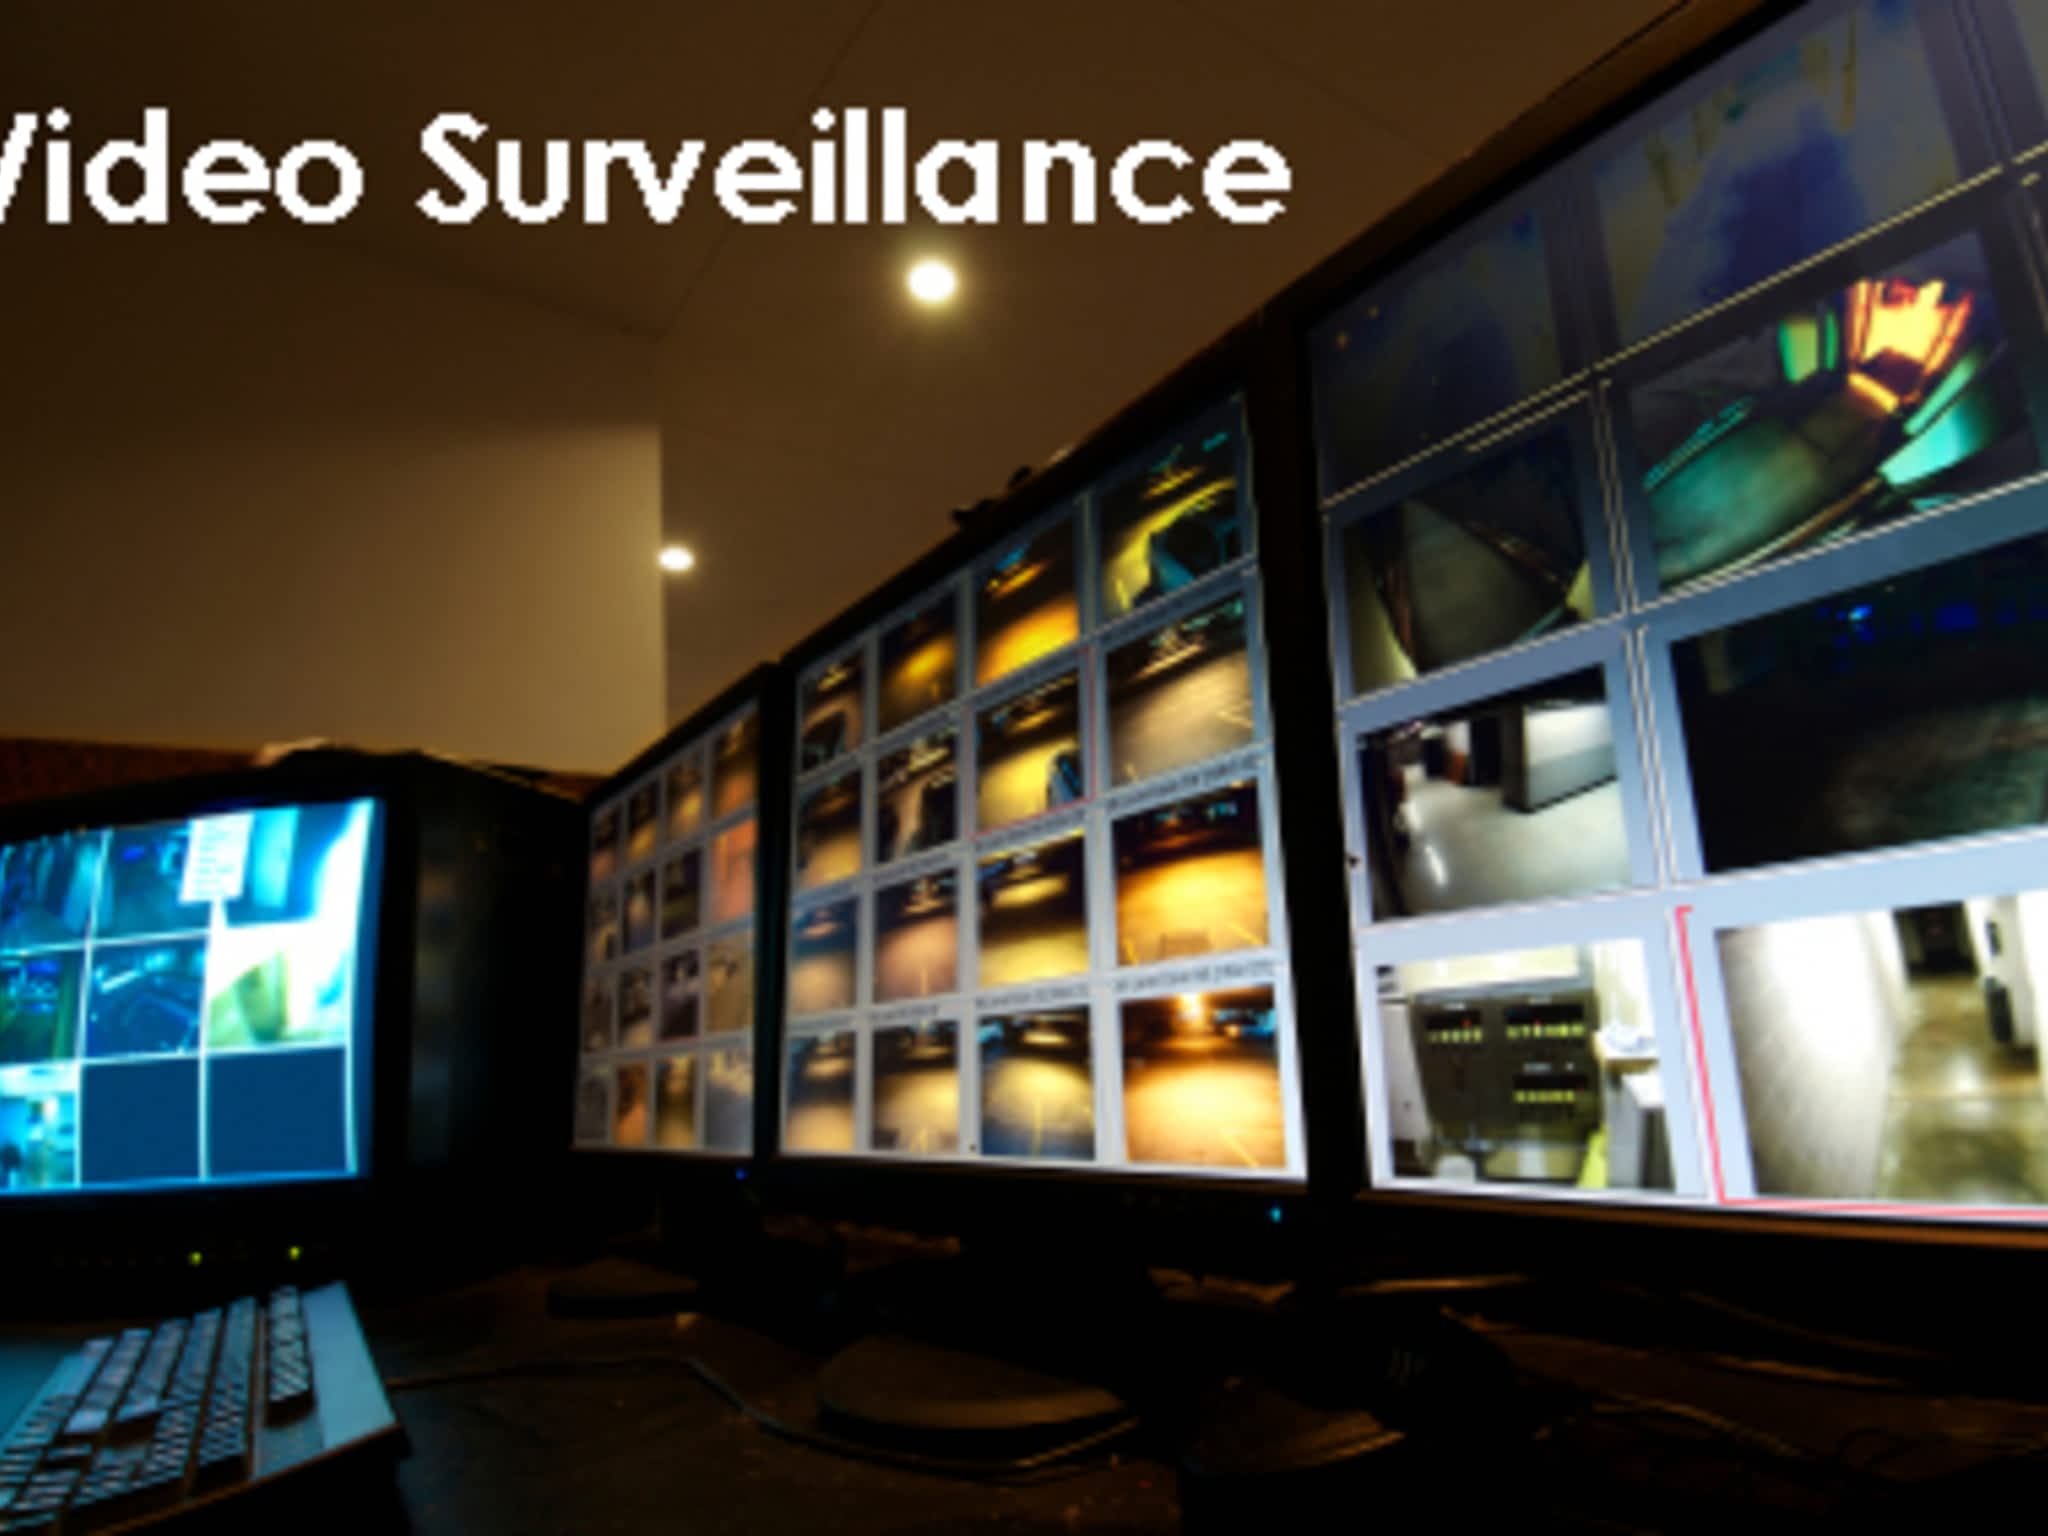 photo Owl-Tech Security System Services